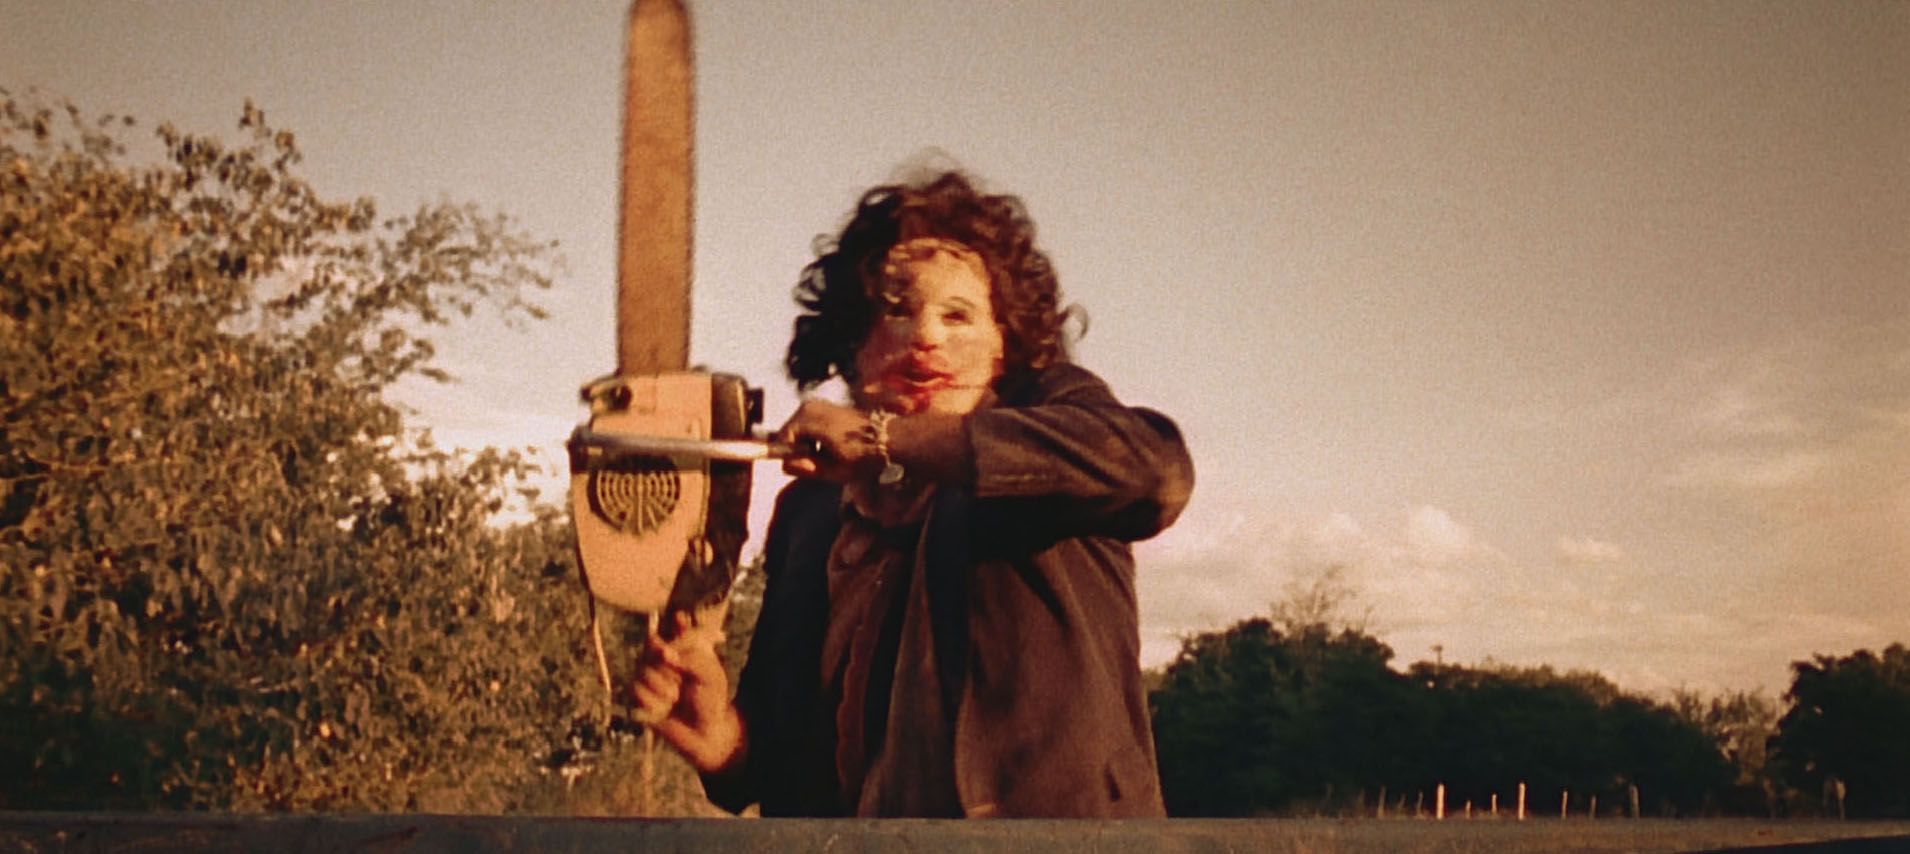 the texas chain saw massacre real